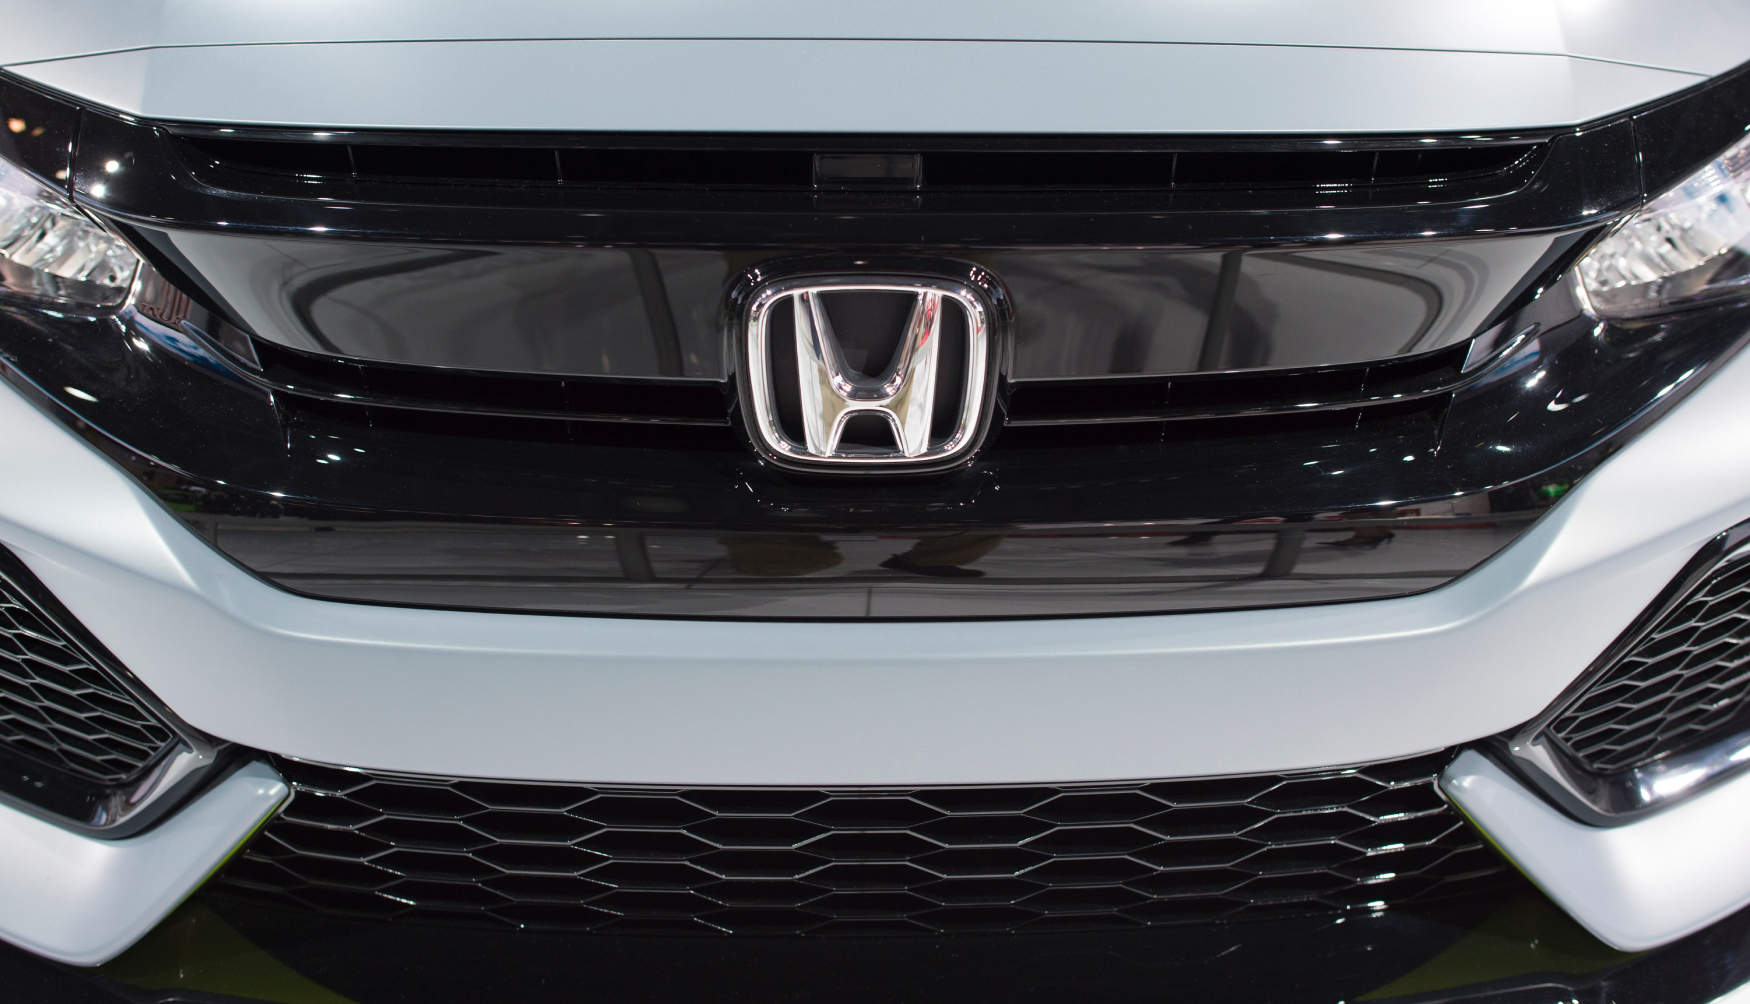 Close up of the Honda logo on the grill of a previous generation of the Honda Civic Hatchback